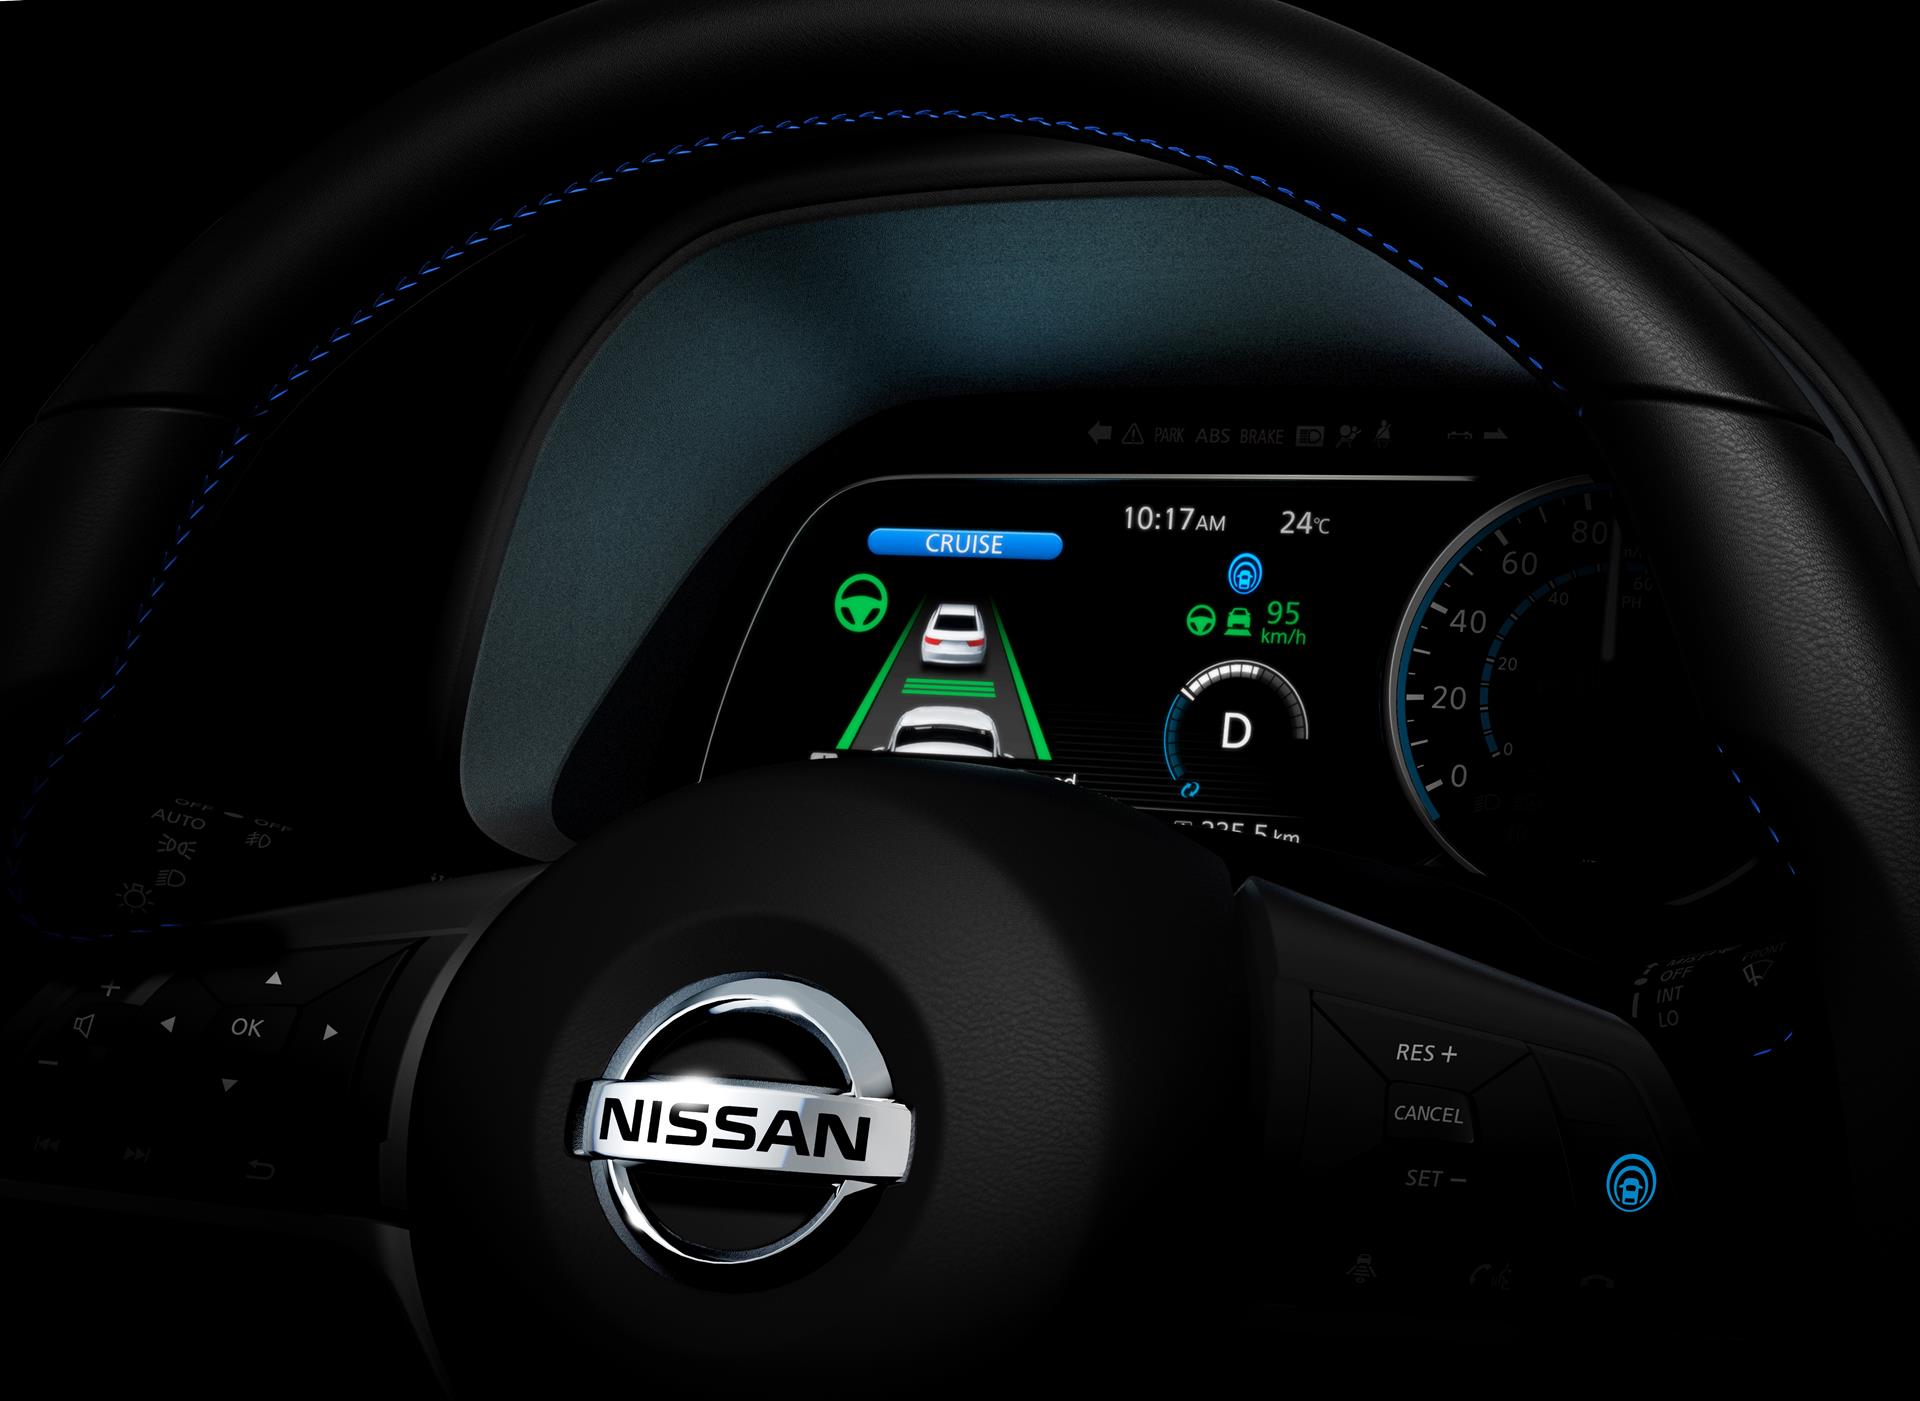 Imagine Always Fitting In – The New Nissan Leaf With Propilot Park, Premieres September 6